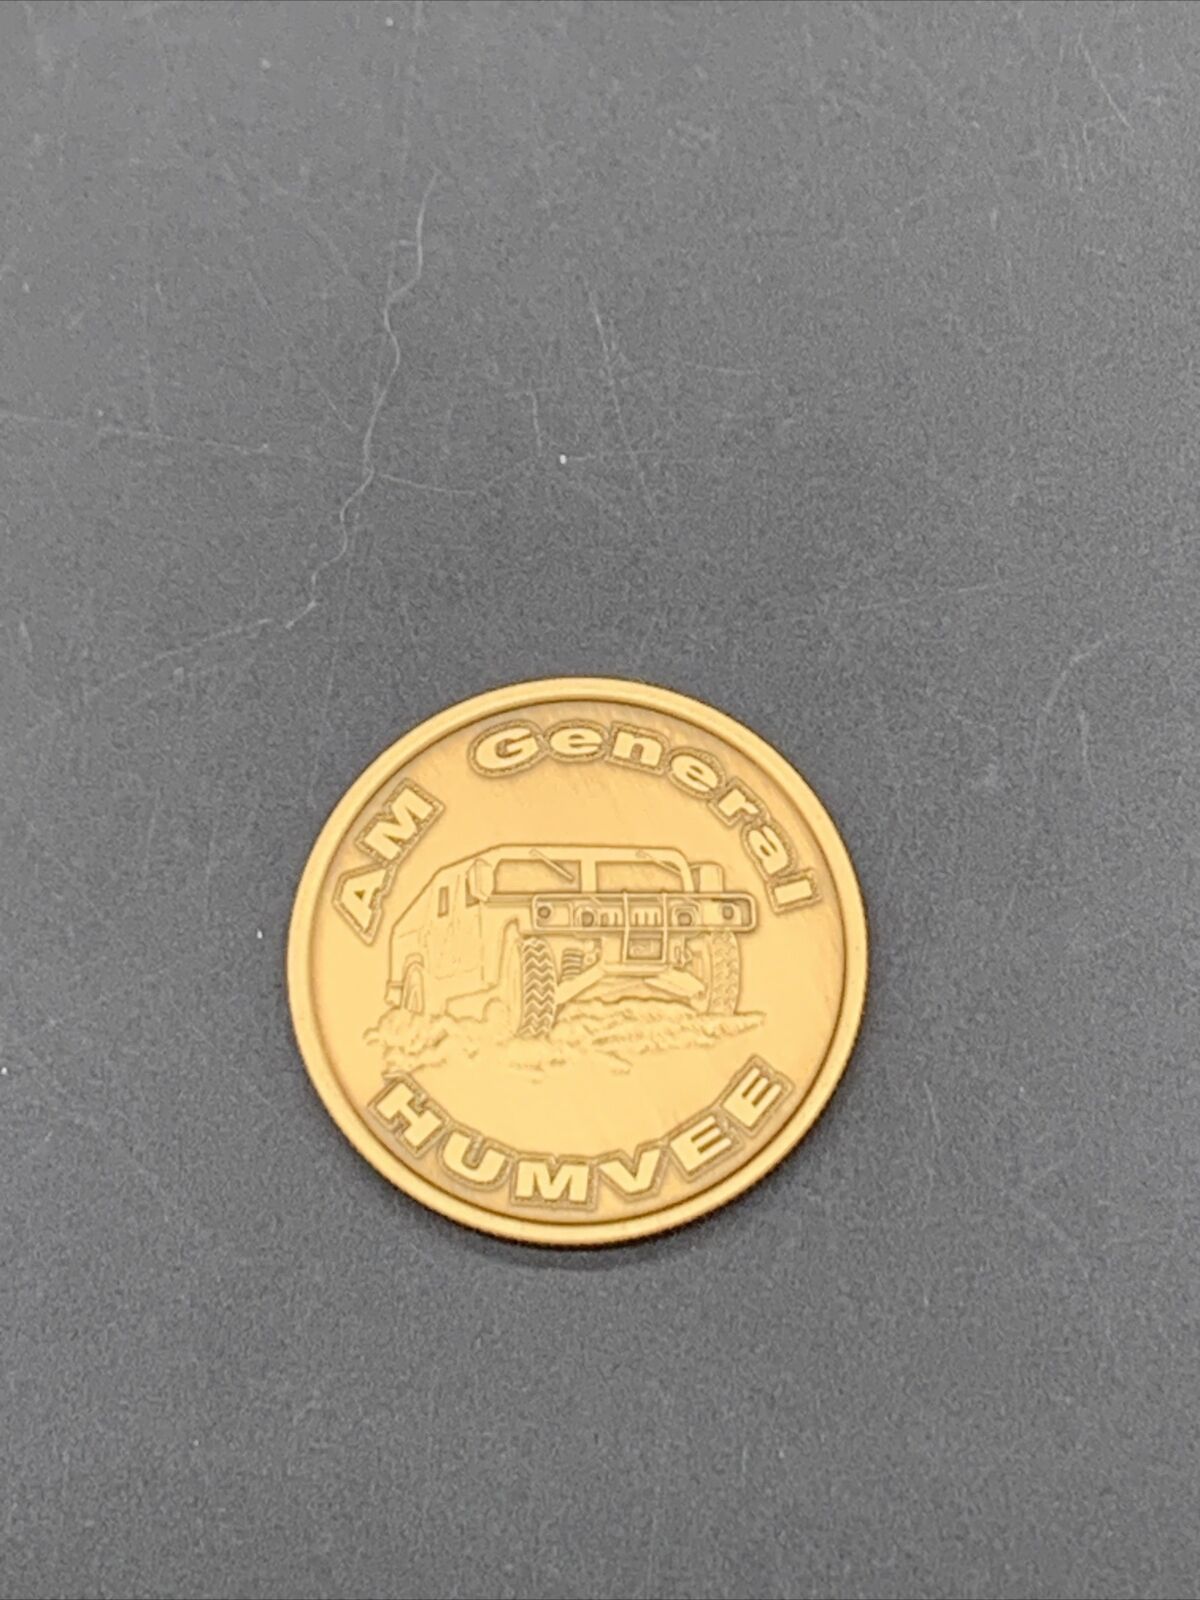 United States Of America Great Seal Challenge AM General Humvee Coin